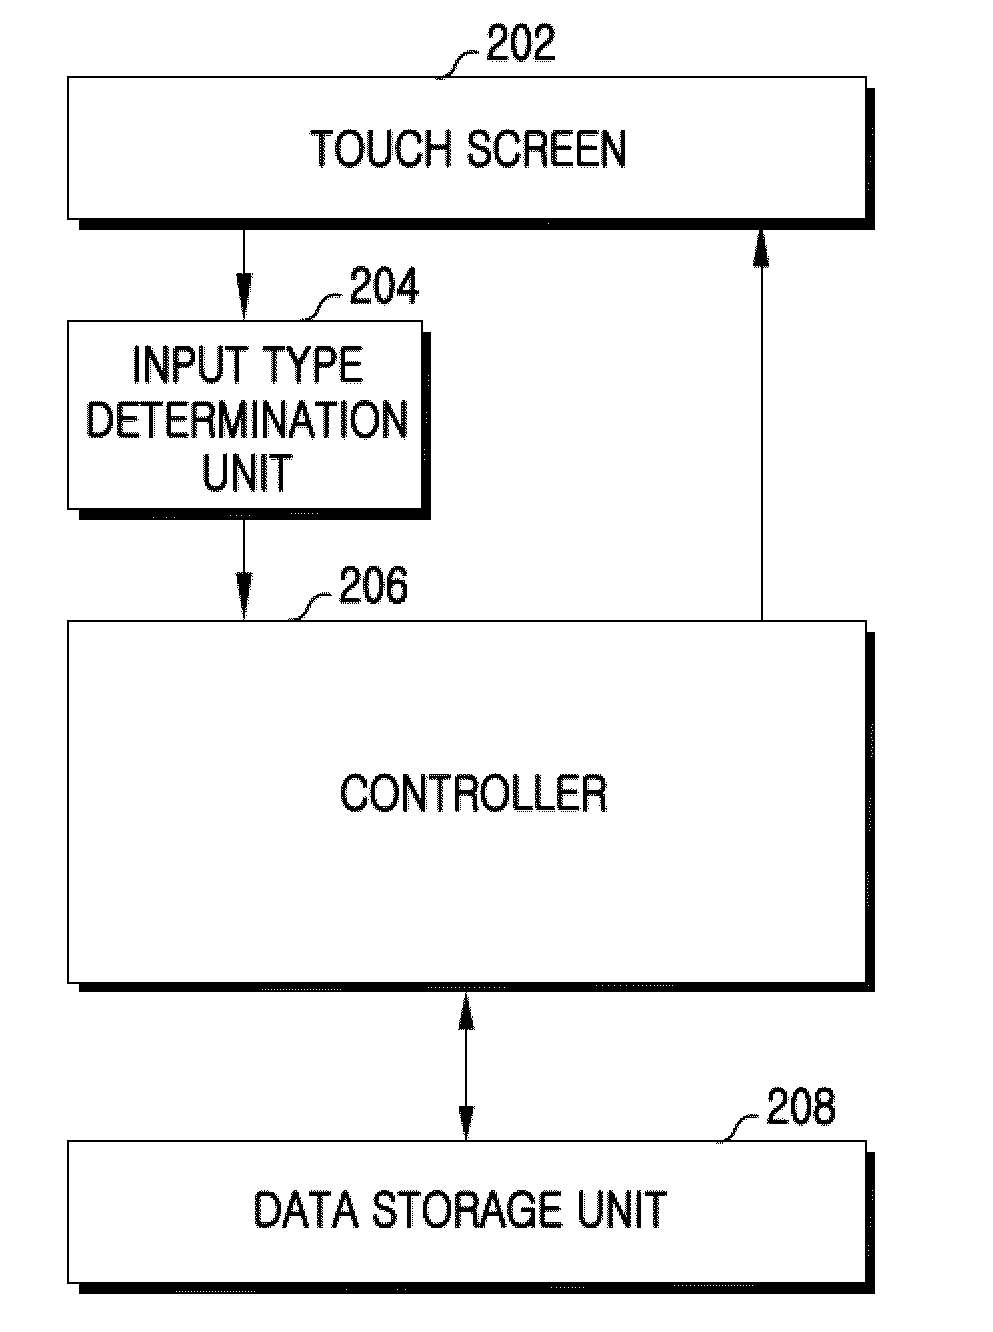 Apparatus and method for determining input in computing equipment with touch screen